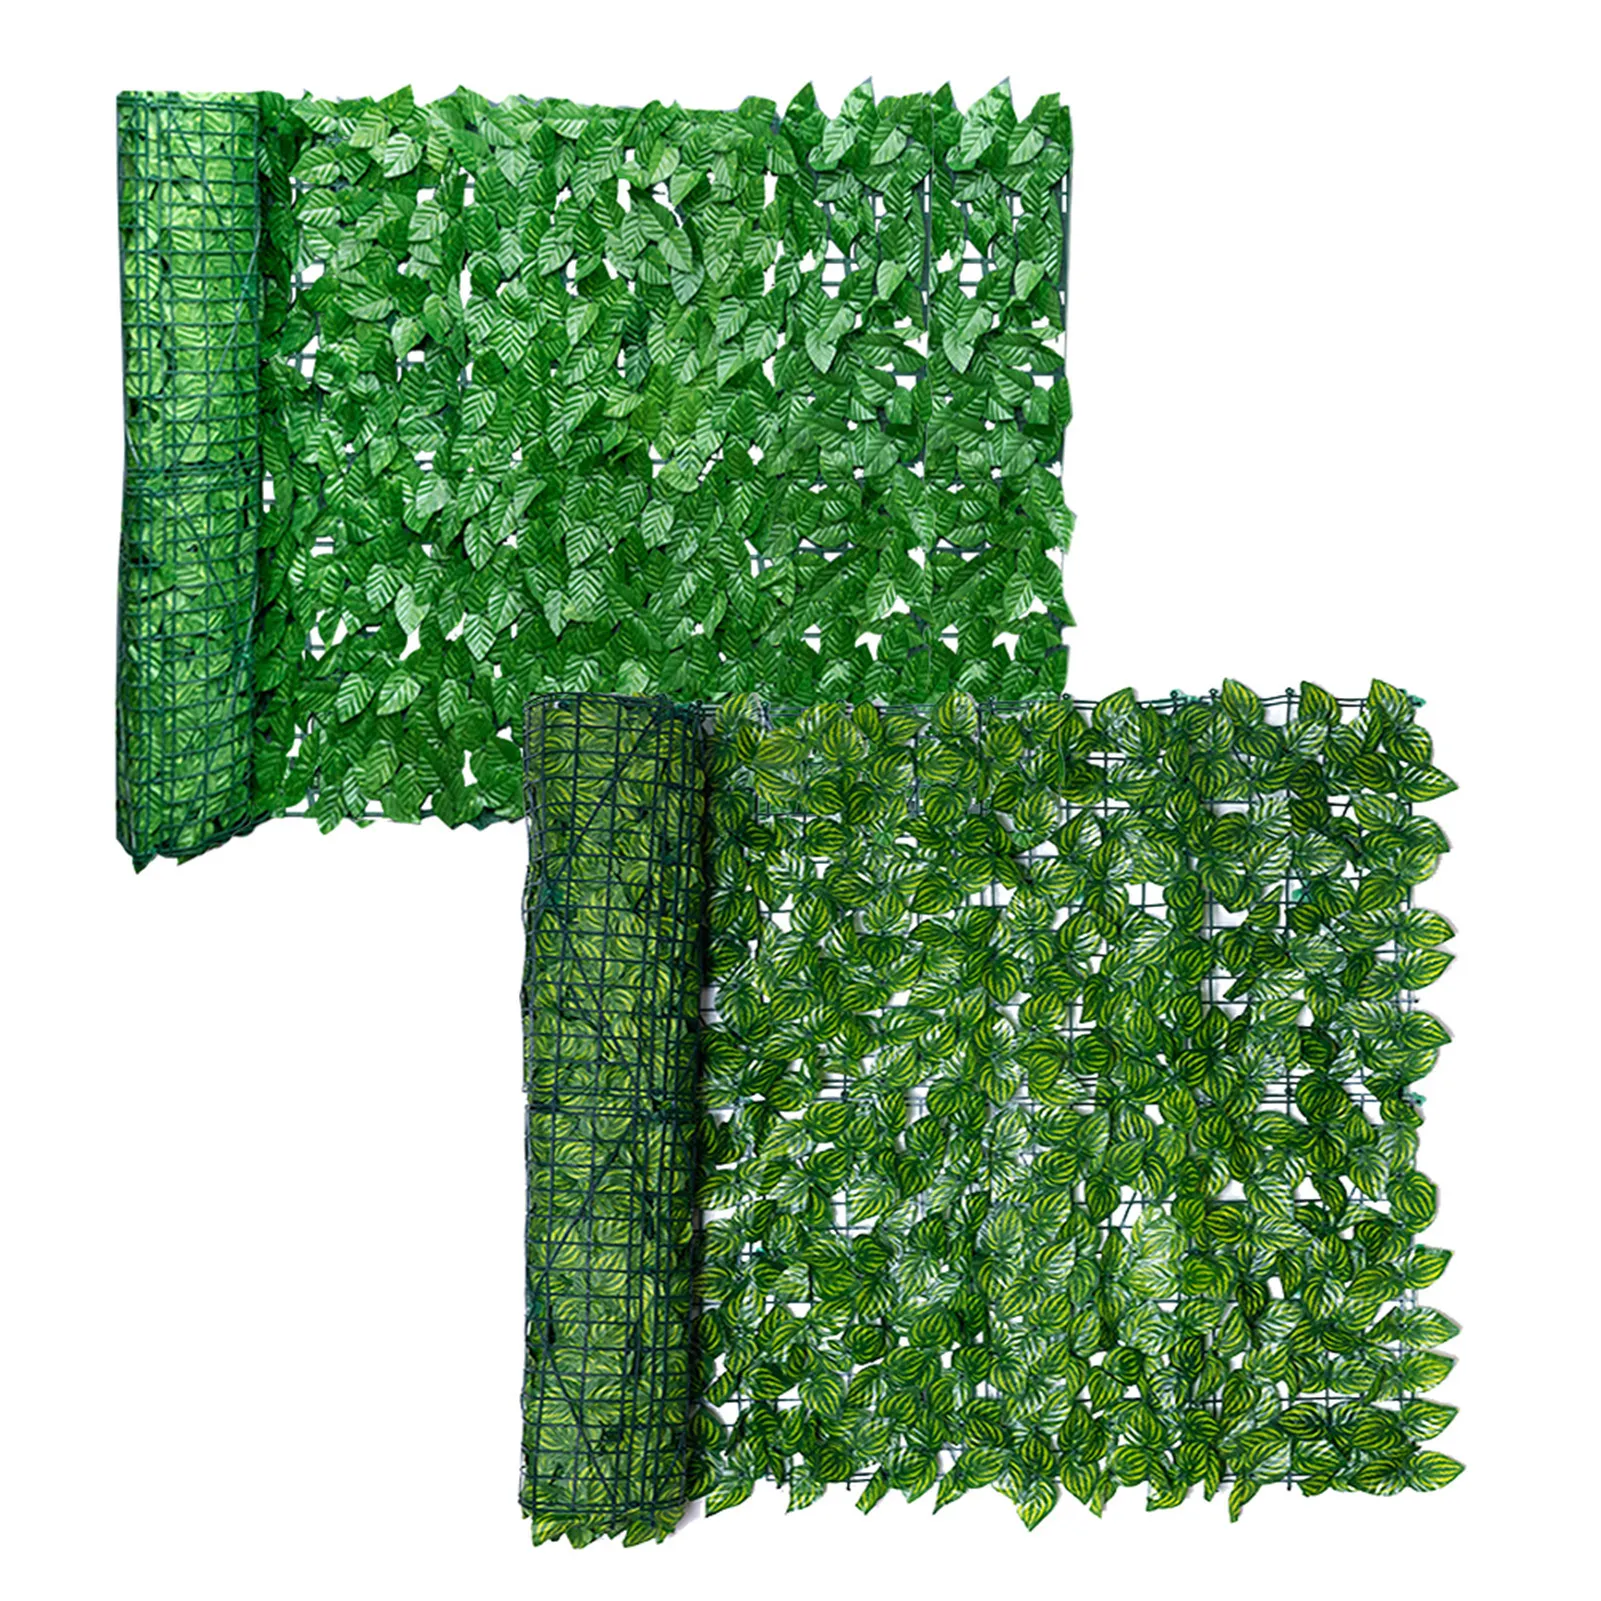 0.5x3M Artificial Leaf Garden Fence Screening Roll UV Fade Protected Privacy Artificial Fence Wall Landscaping Ivy Fence Panel